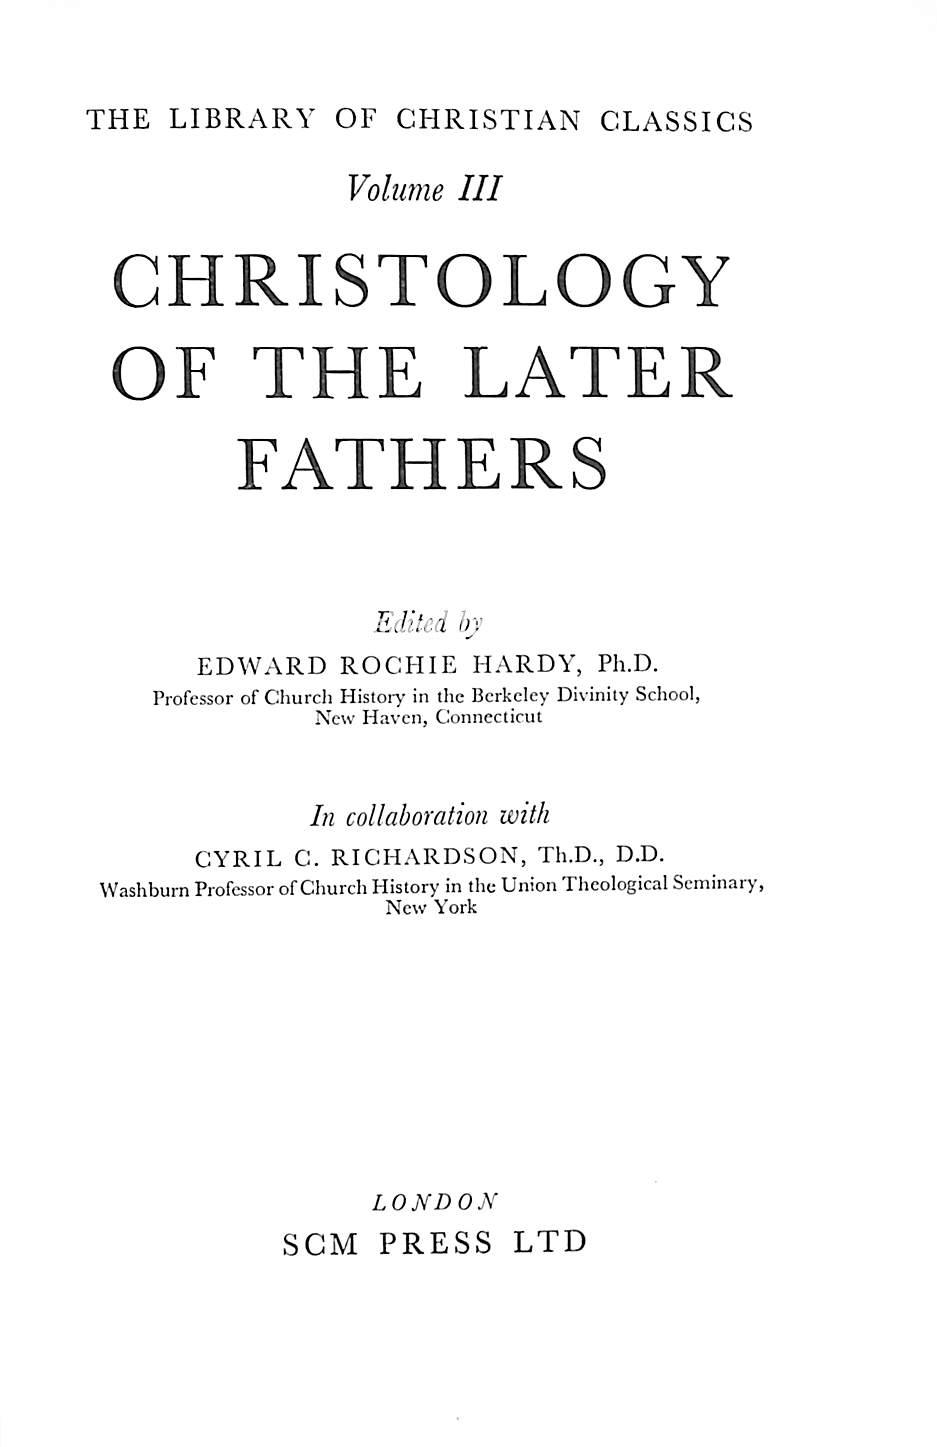 Christology of the Later Fathers III